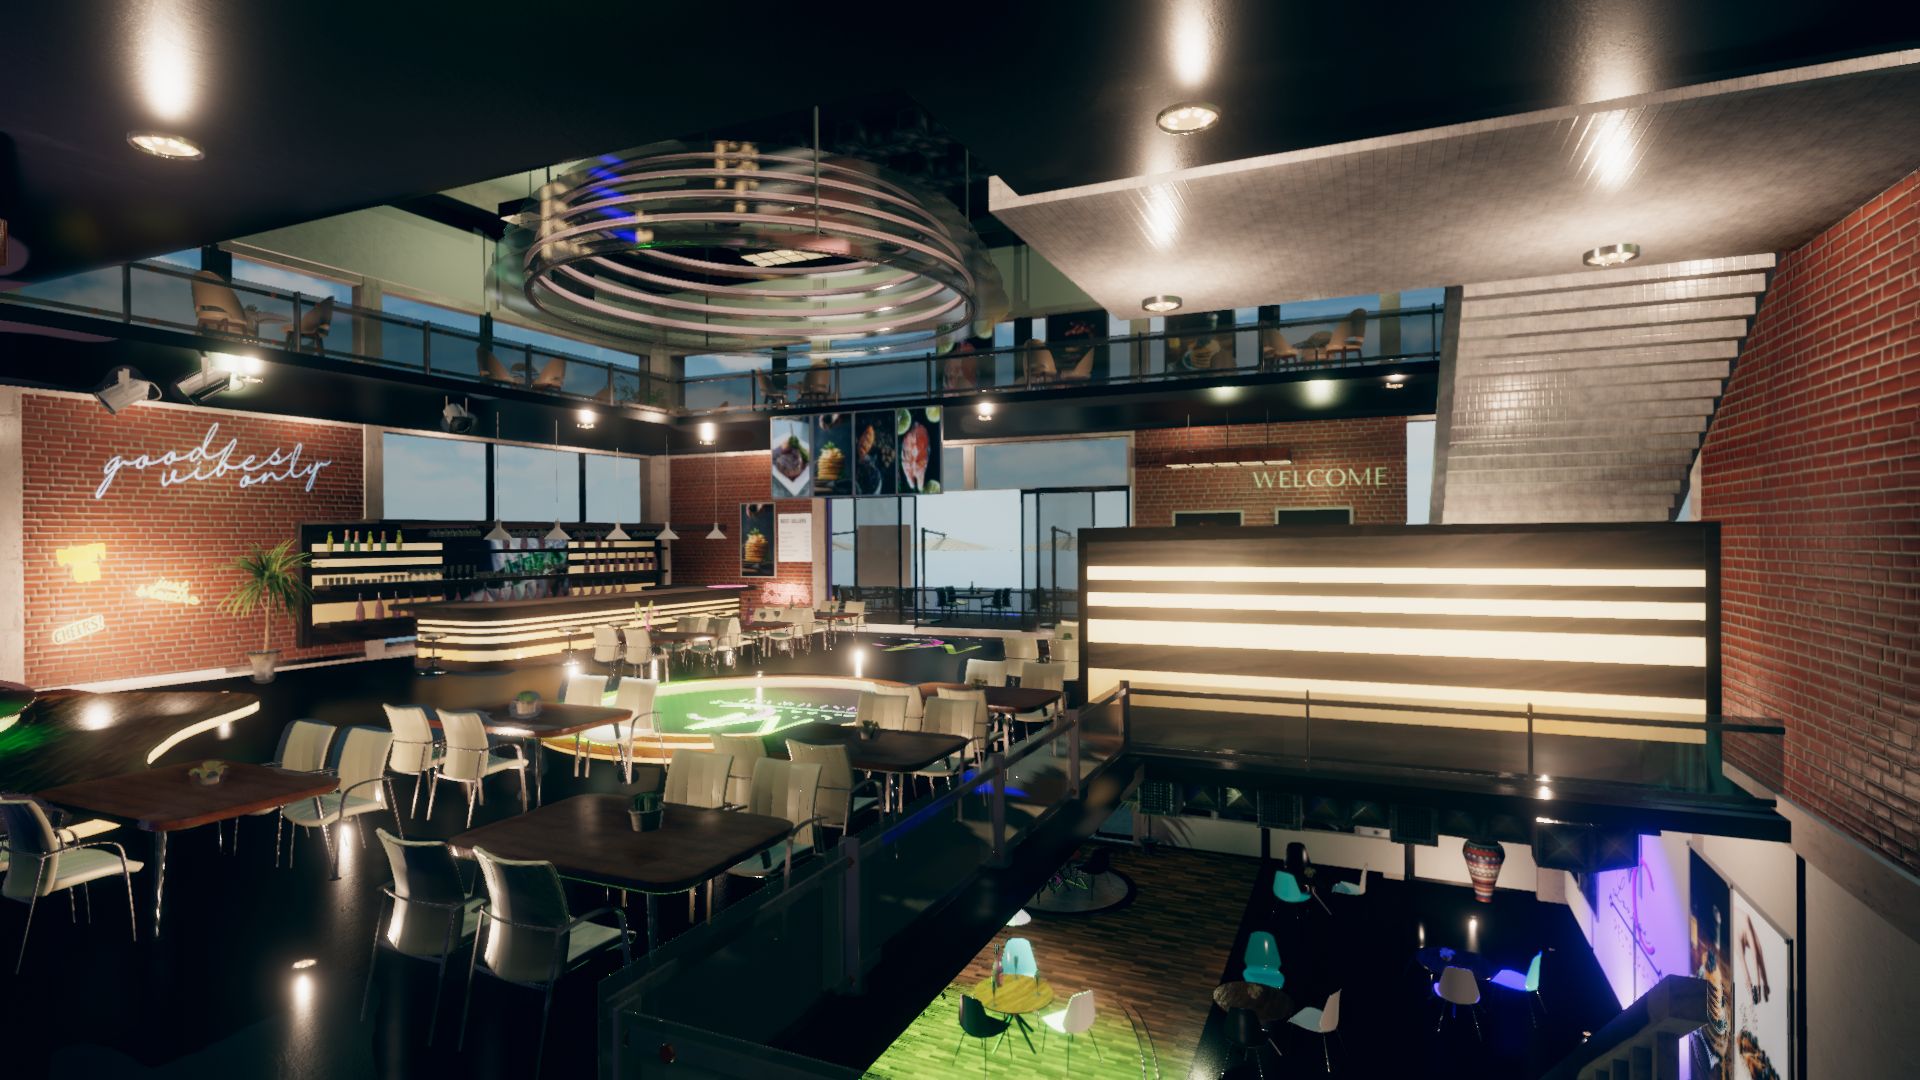 An image showing MC Restaurant and Lounge asset pack, created with Unity Engine.